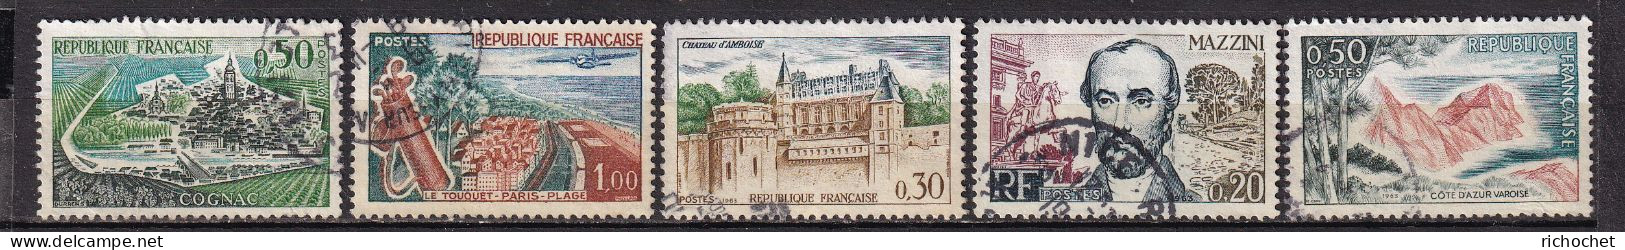 France  1314 + 1355 + 1384 + 1390 + 1391  ° - Used Stamps